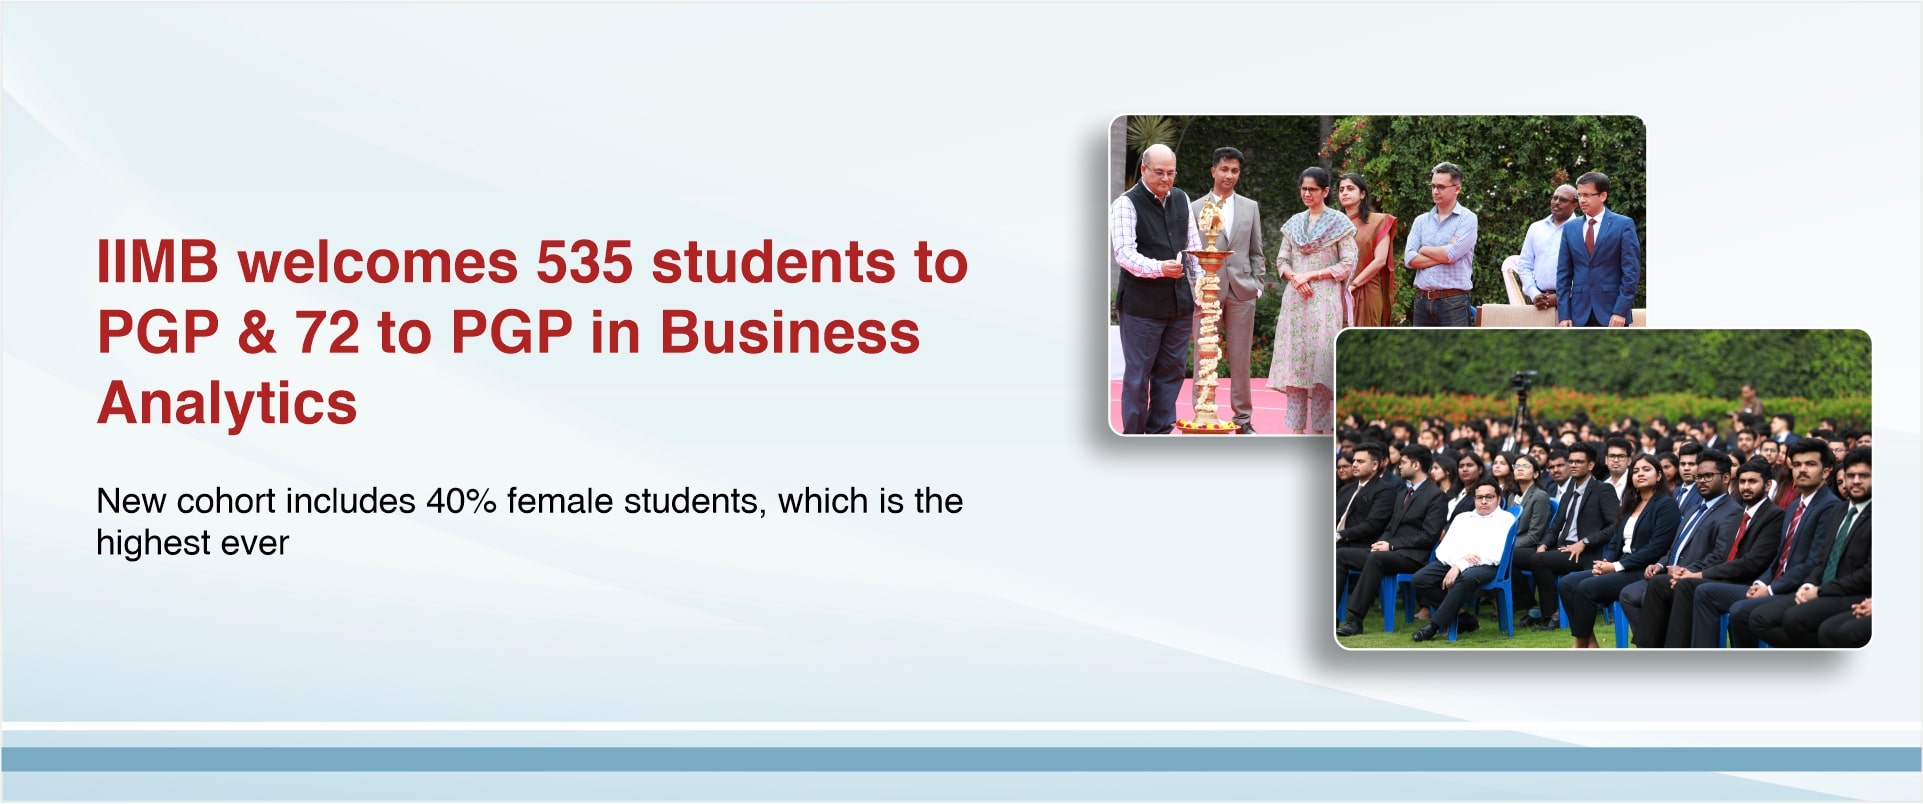  IIMB welcomes 535 students to PGP & 72 to PGP in Business Analytics 